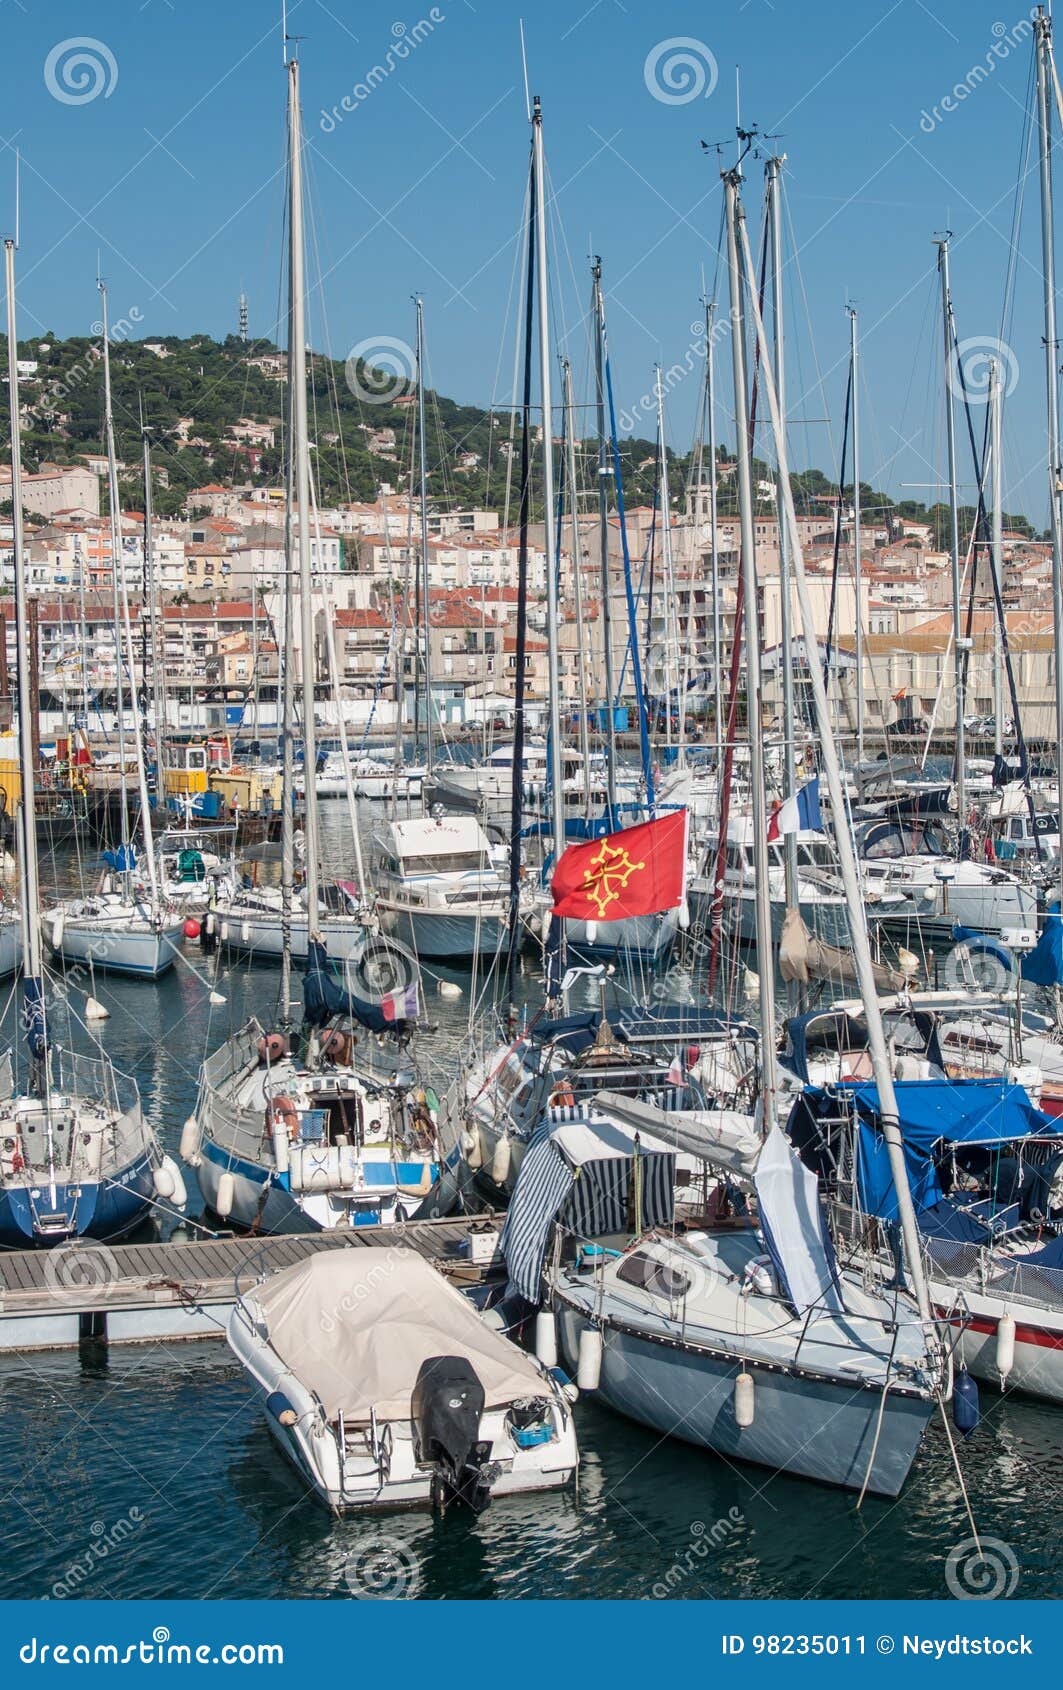 Sailboats Moored in the Port in Sete Editorial Photo - Image of europe ...